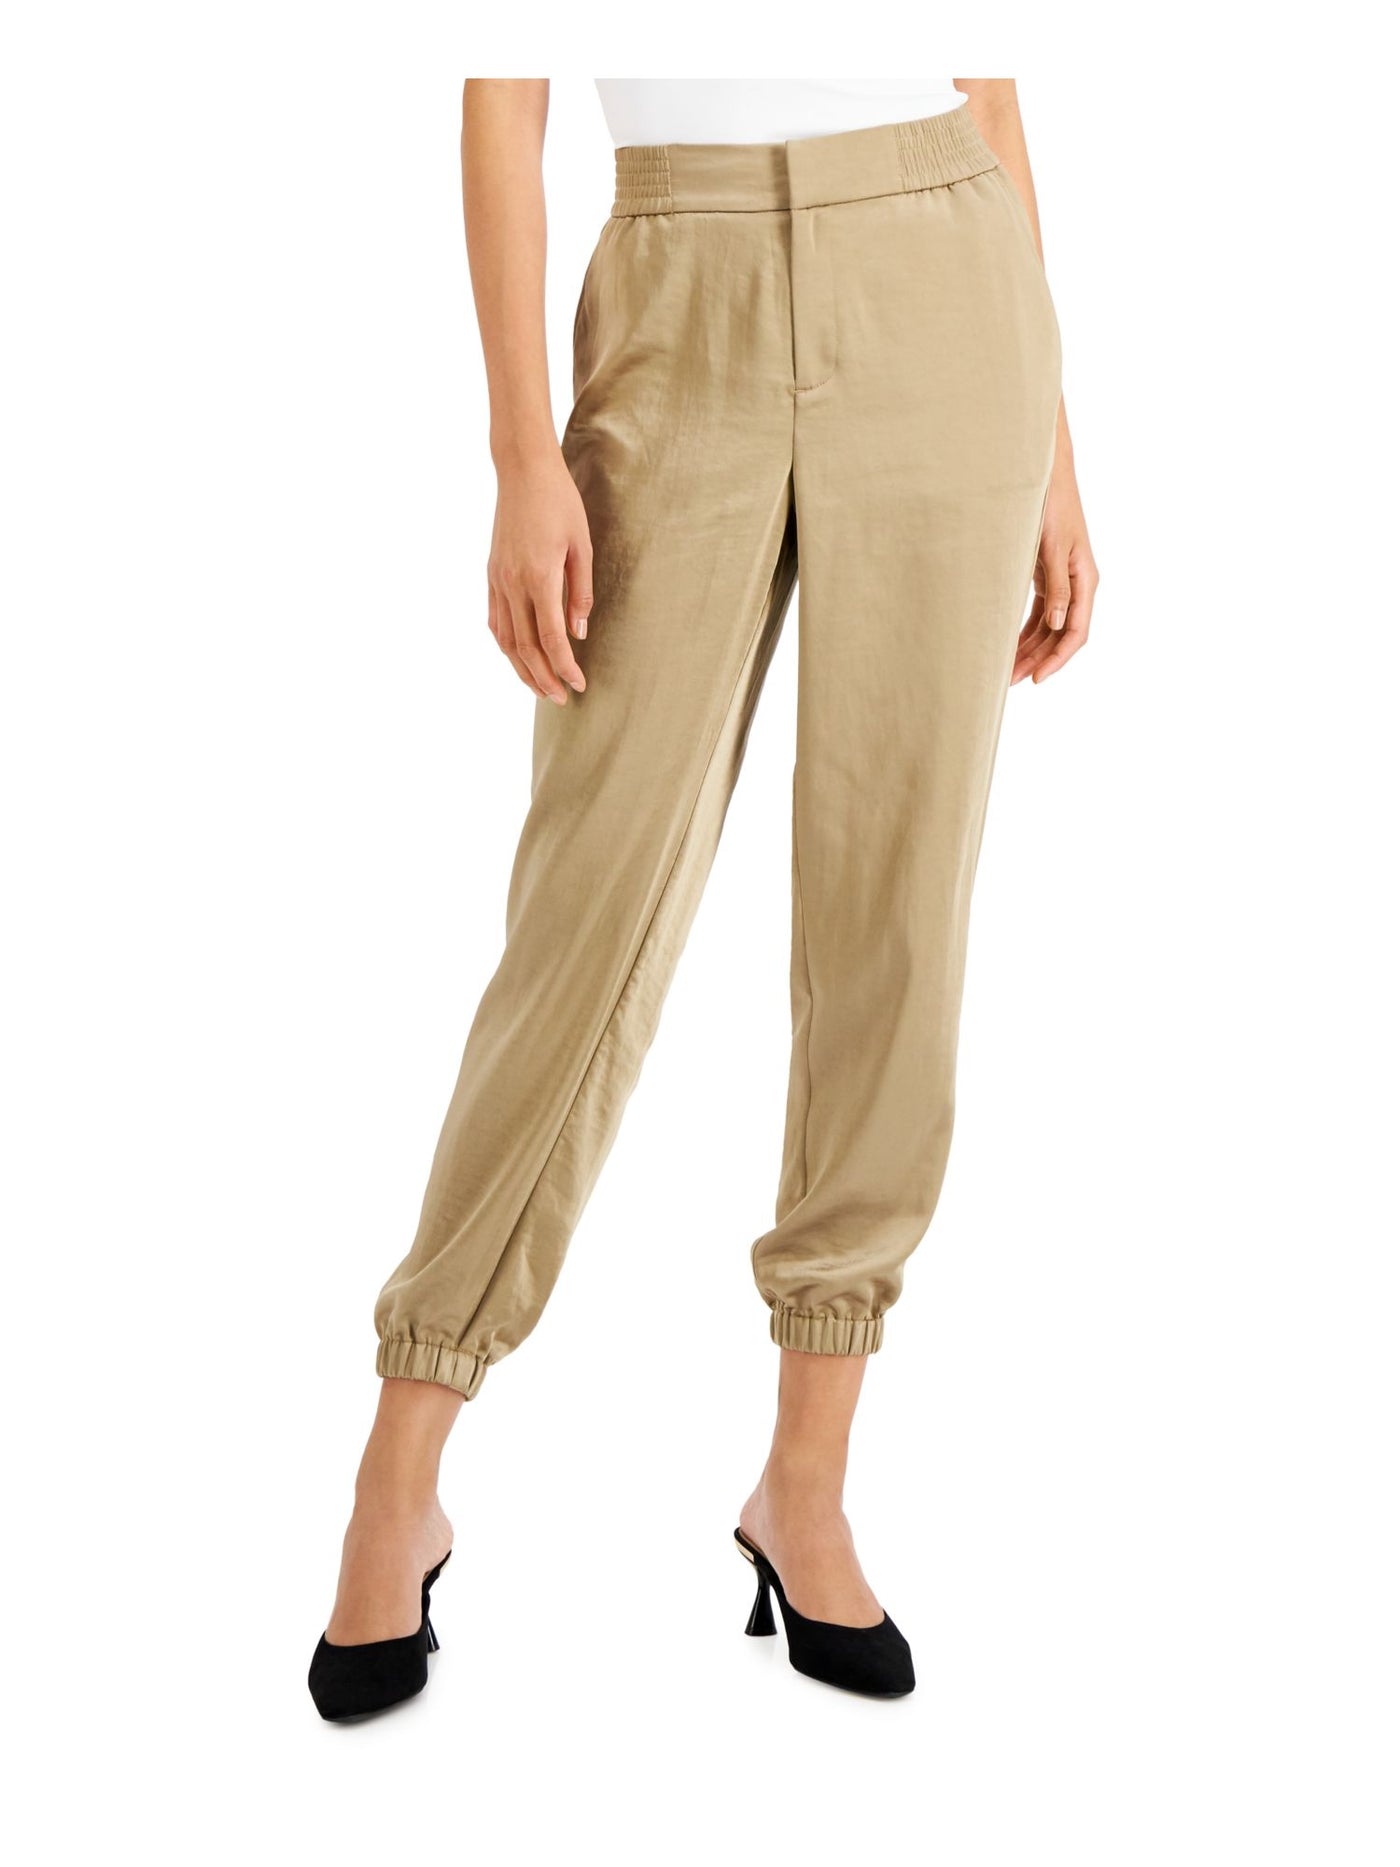 CHARTER CLUB Womens Beige Zippered Pocketed Ankle  Elastic Waistband And Hem Wear To Work Cuffed Pants 14